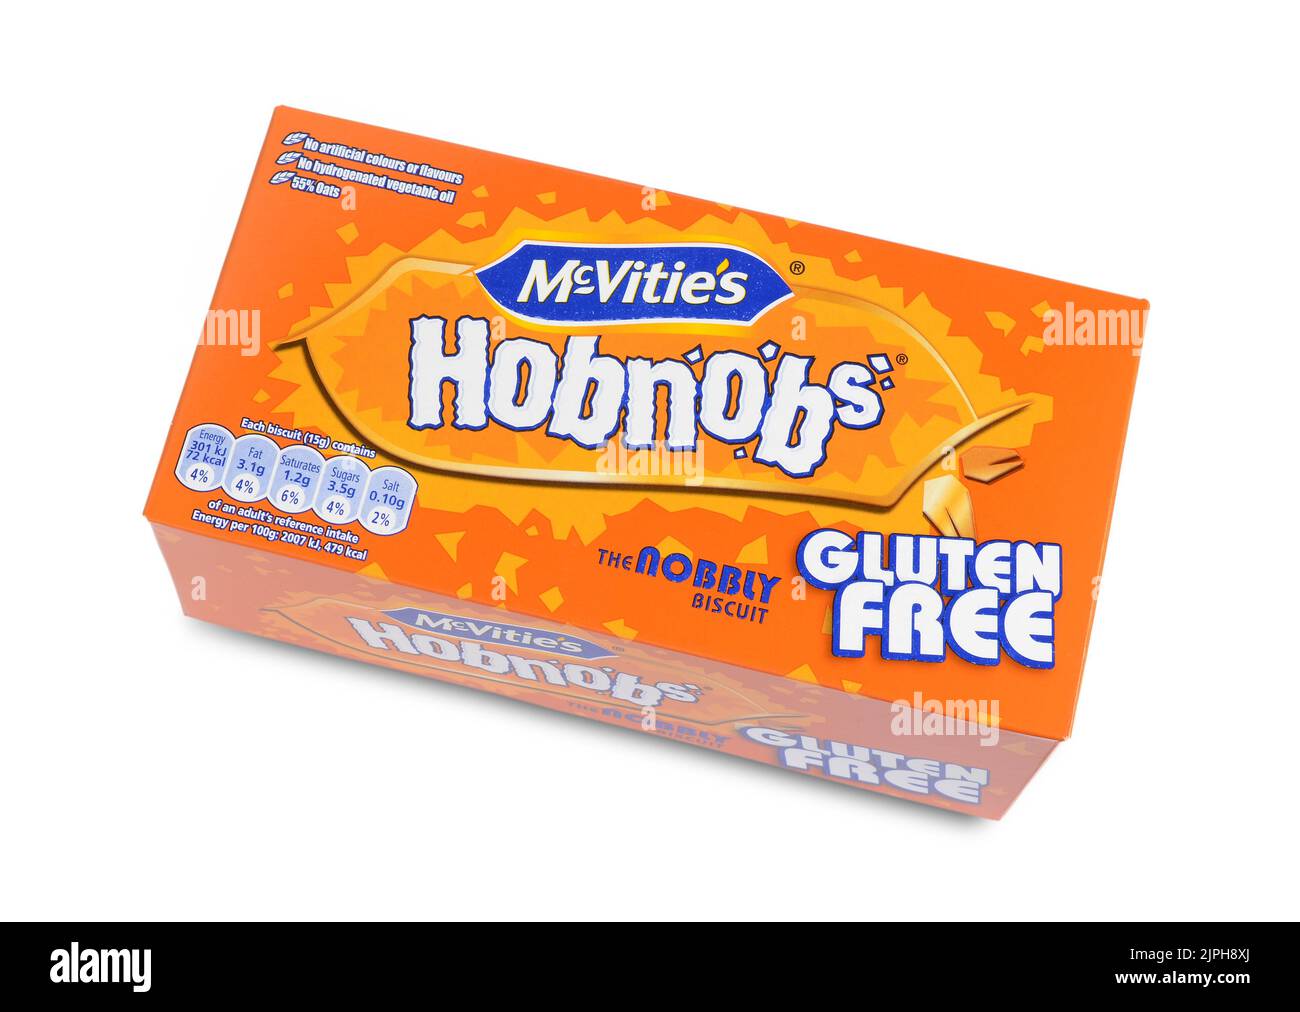 Pack shot of McVities Gluten Free Hobnob's biscuits on white background cut out Stock Photo